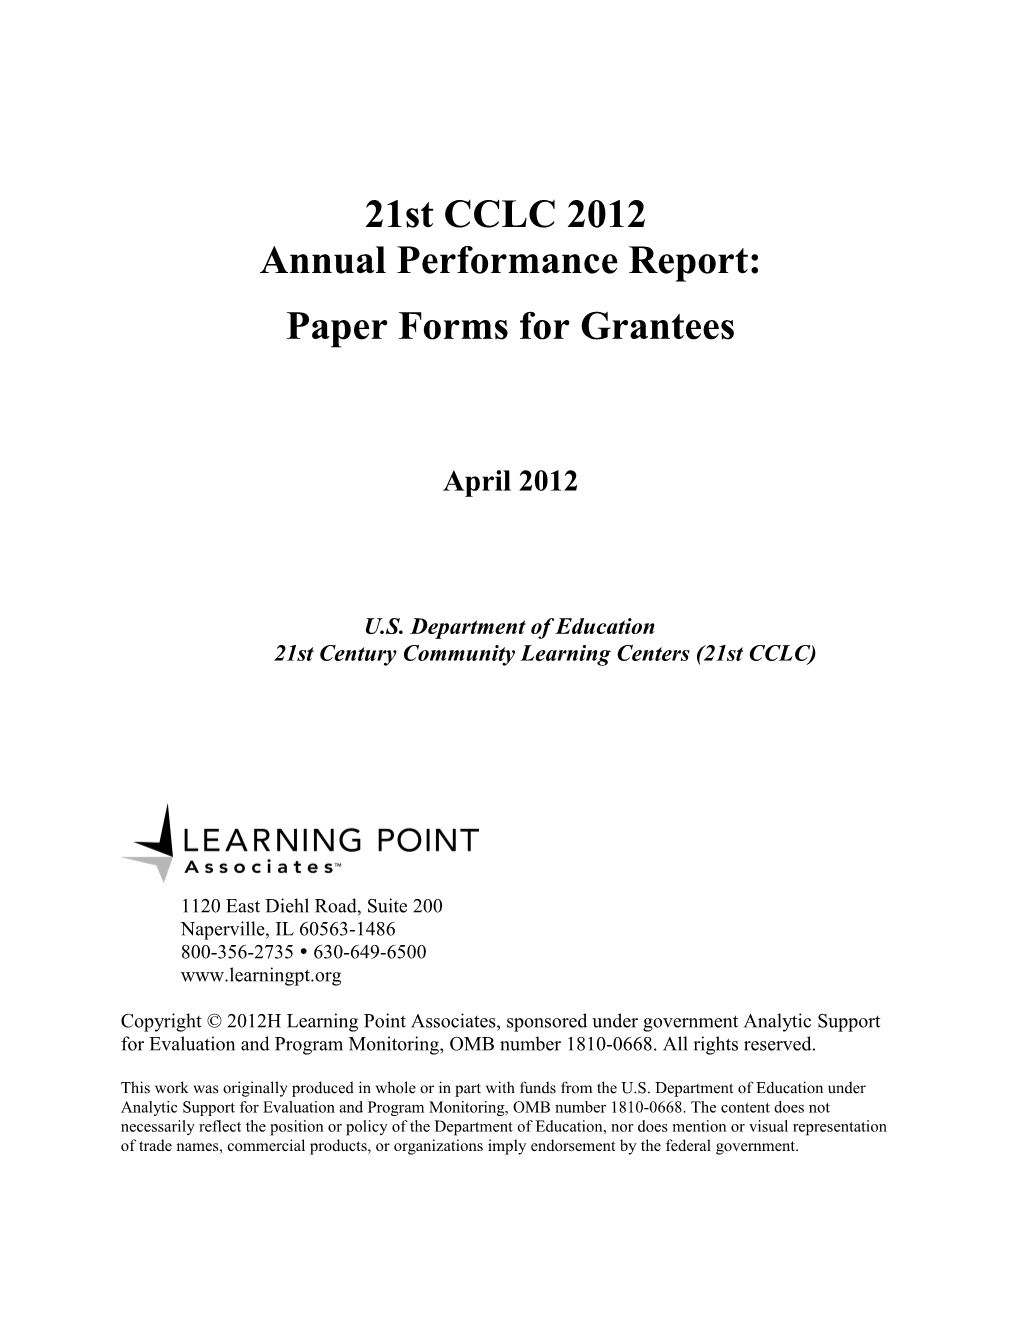 Paper Forms for Grantees